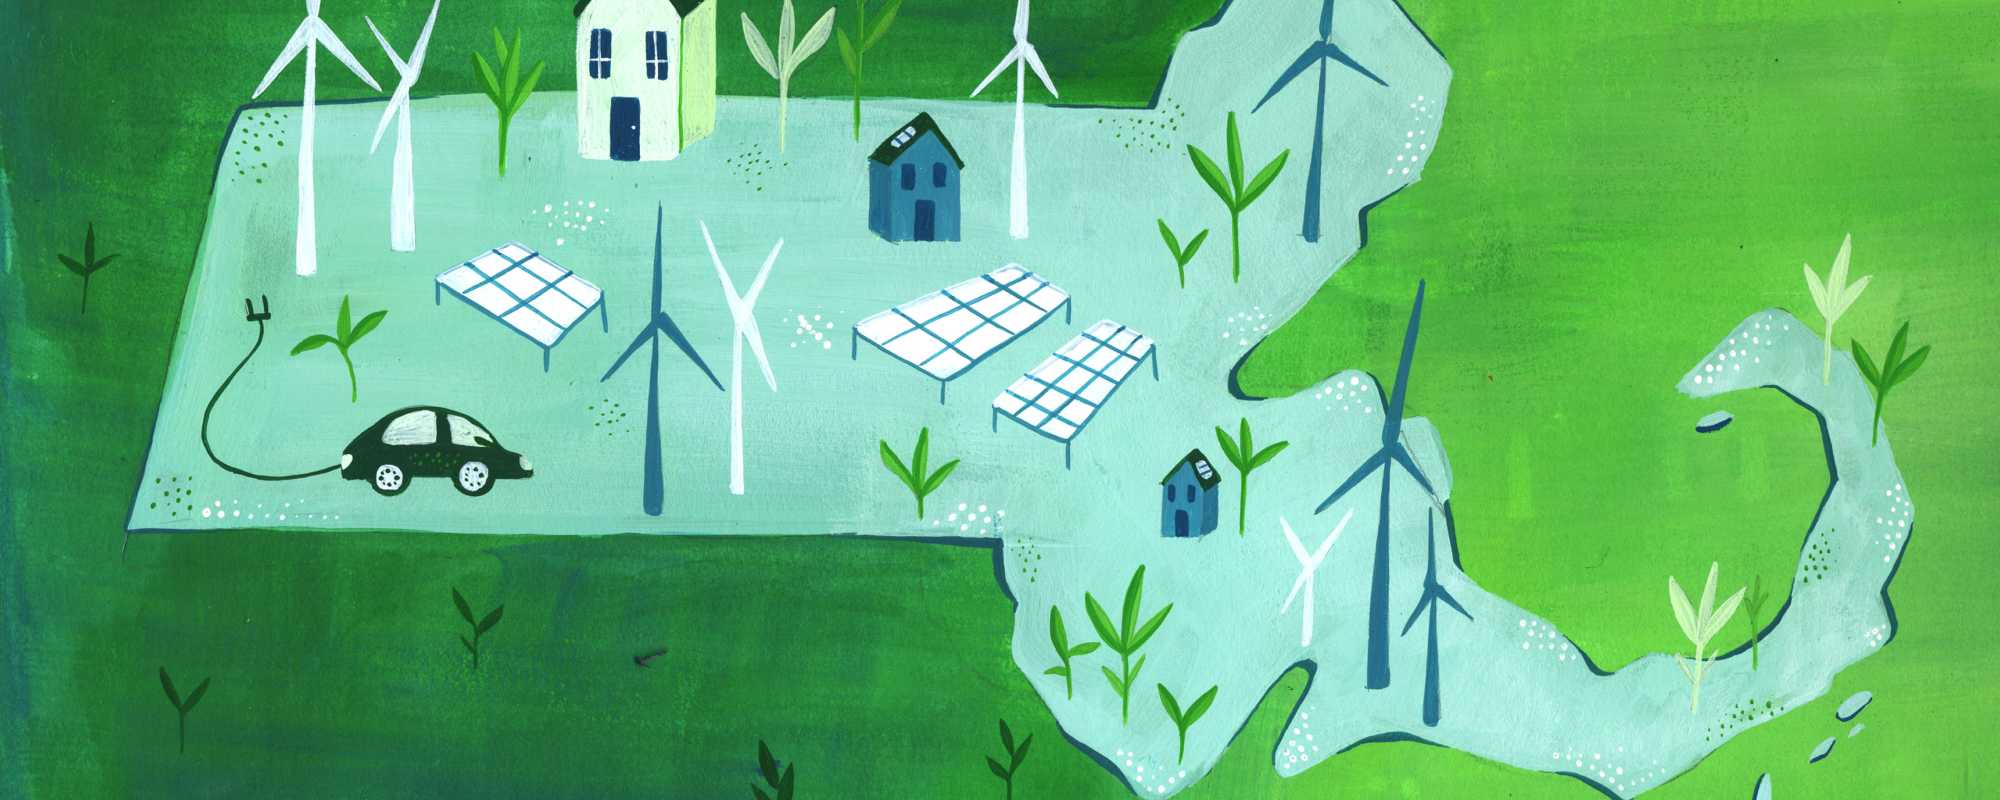 Massachusetts with renewable energy & clean homes, by Christine Rea